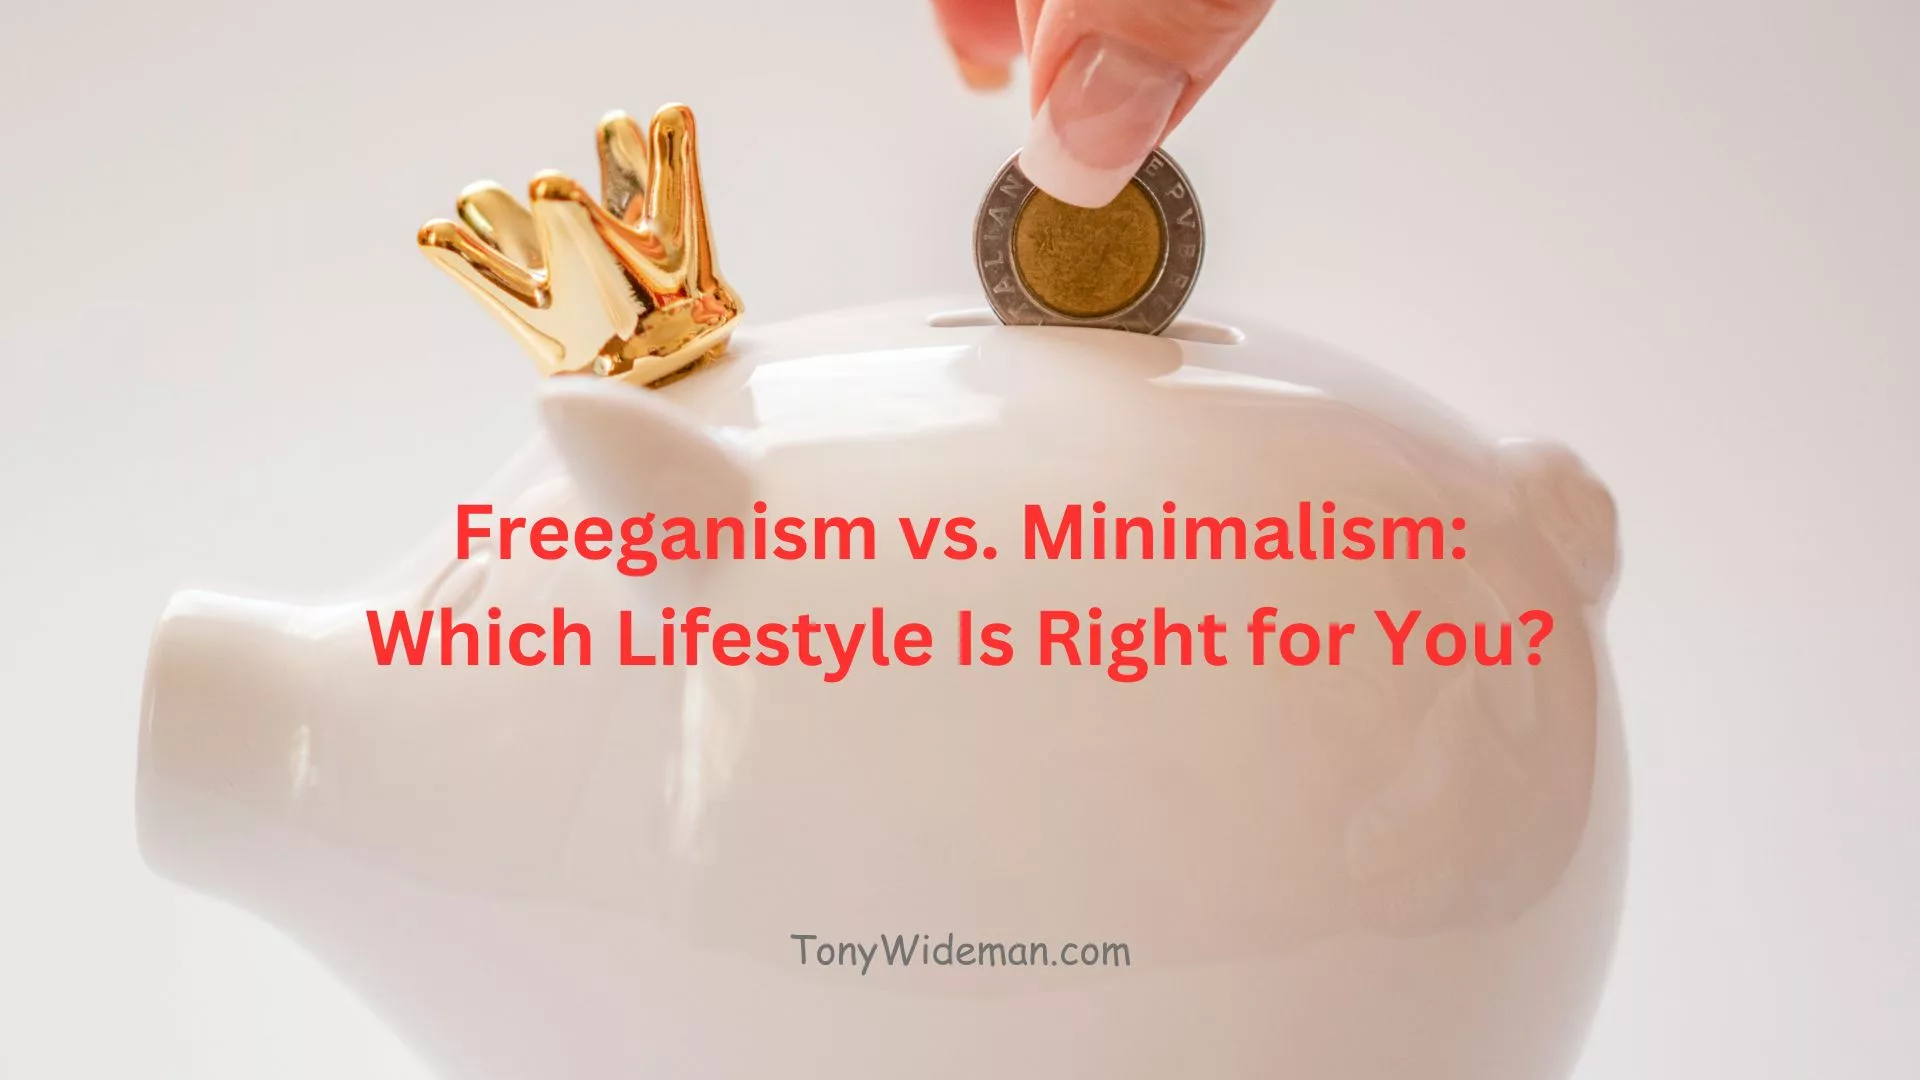 Freeganism vs. Minimalism: Which Lifestyle Is Right for You?